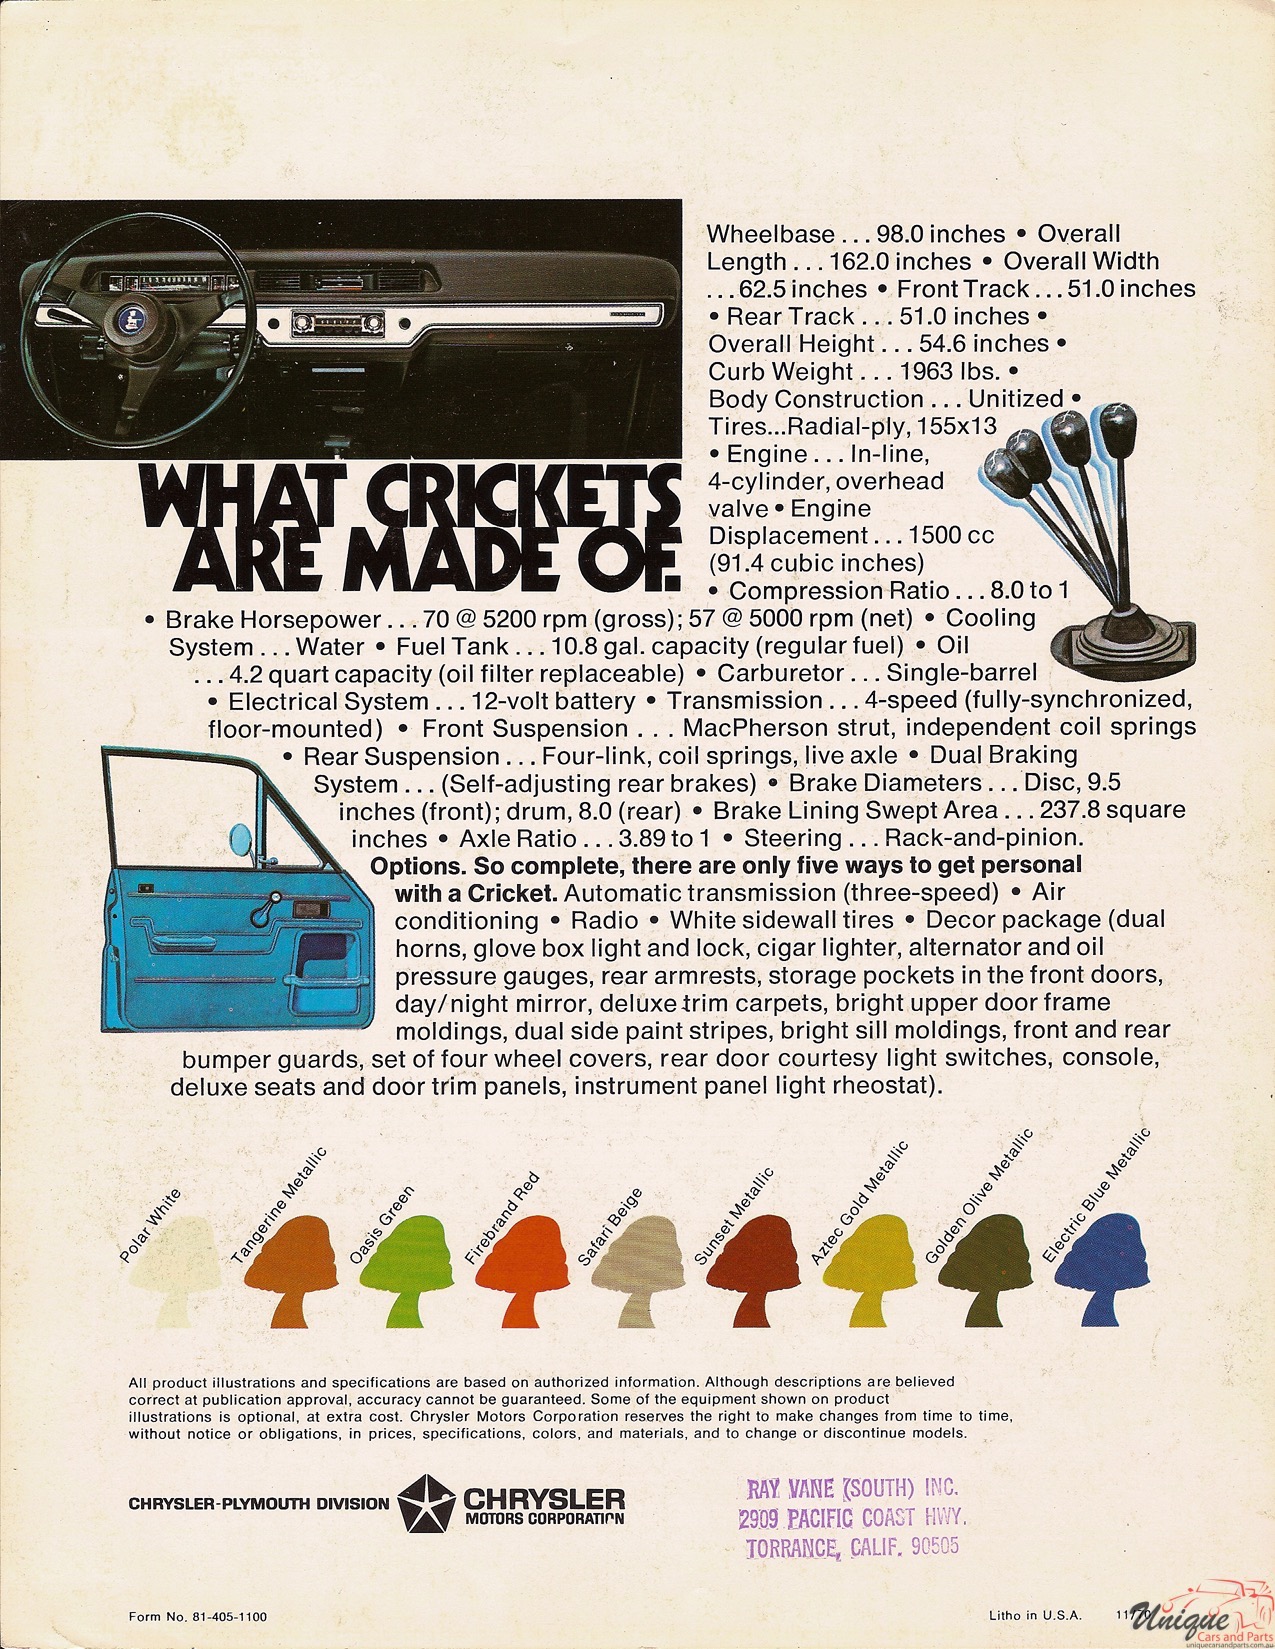 1971 Plymouth Cricket Brochure Page 2